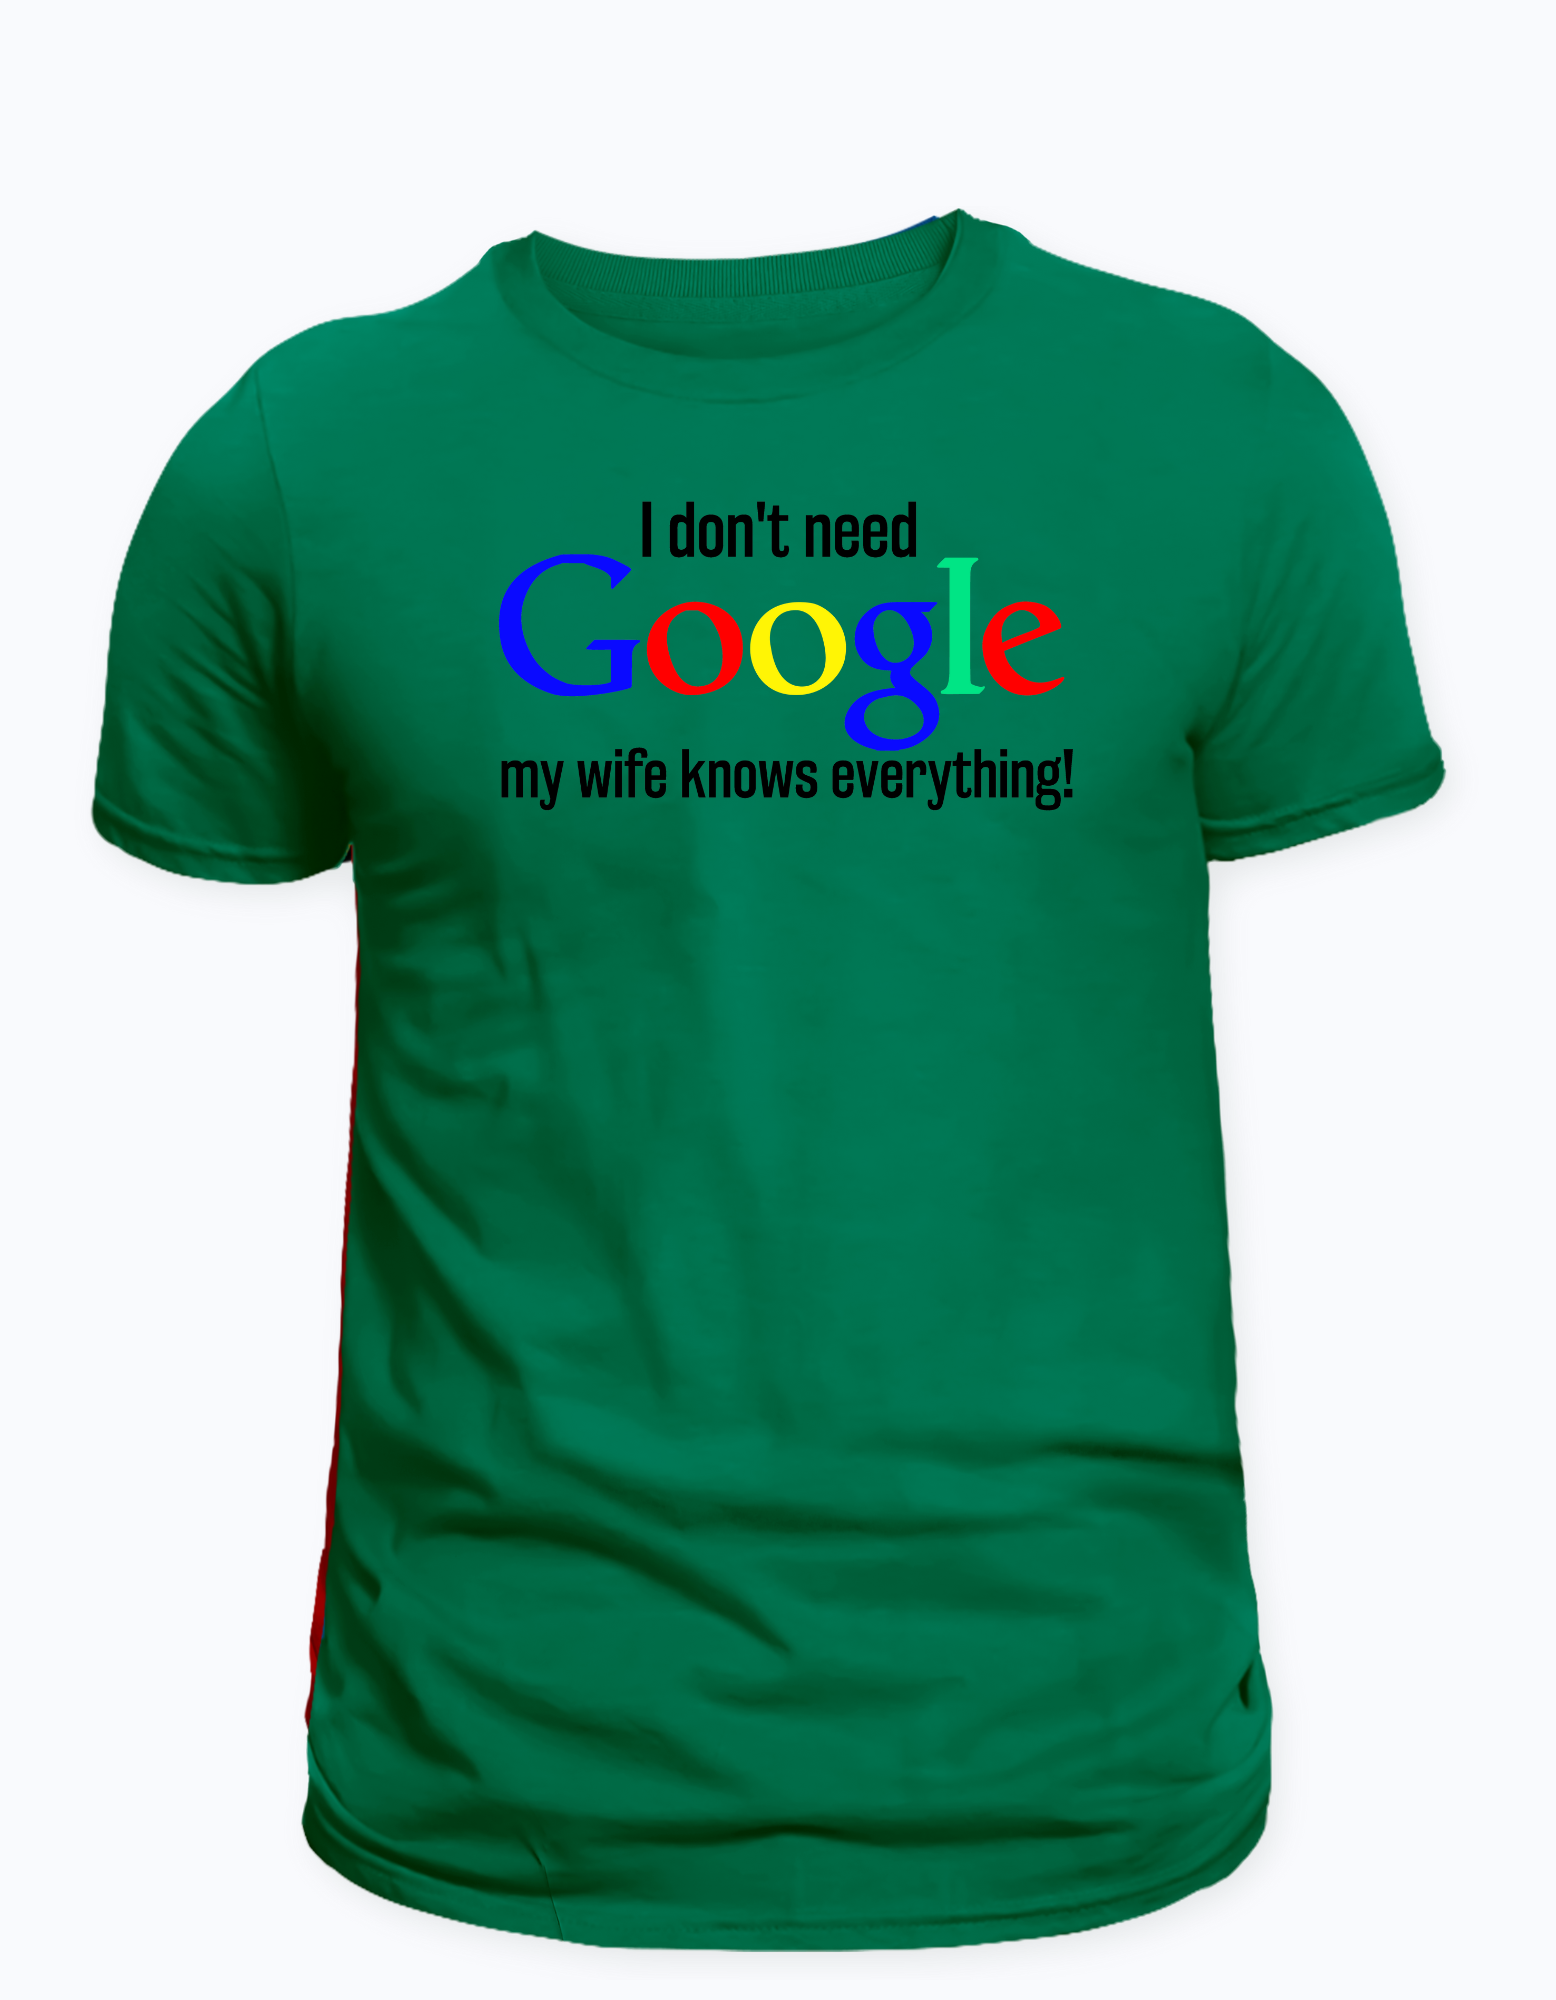 I don't need google my wife knows everything t-shirt